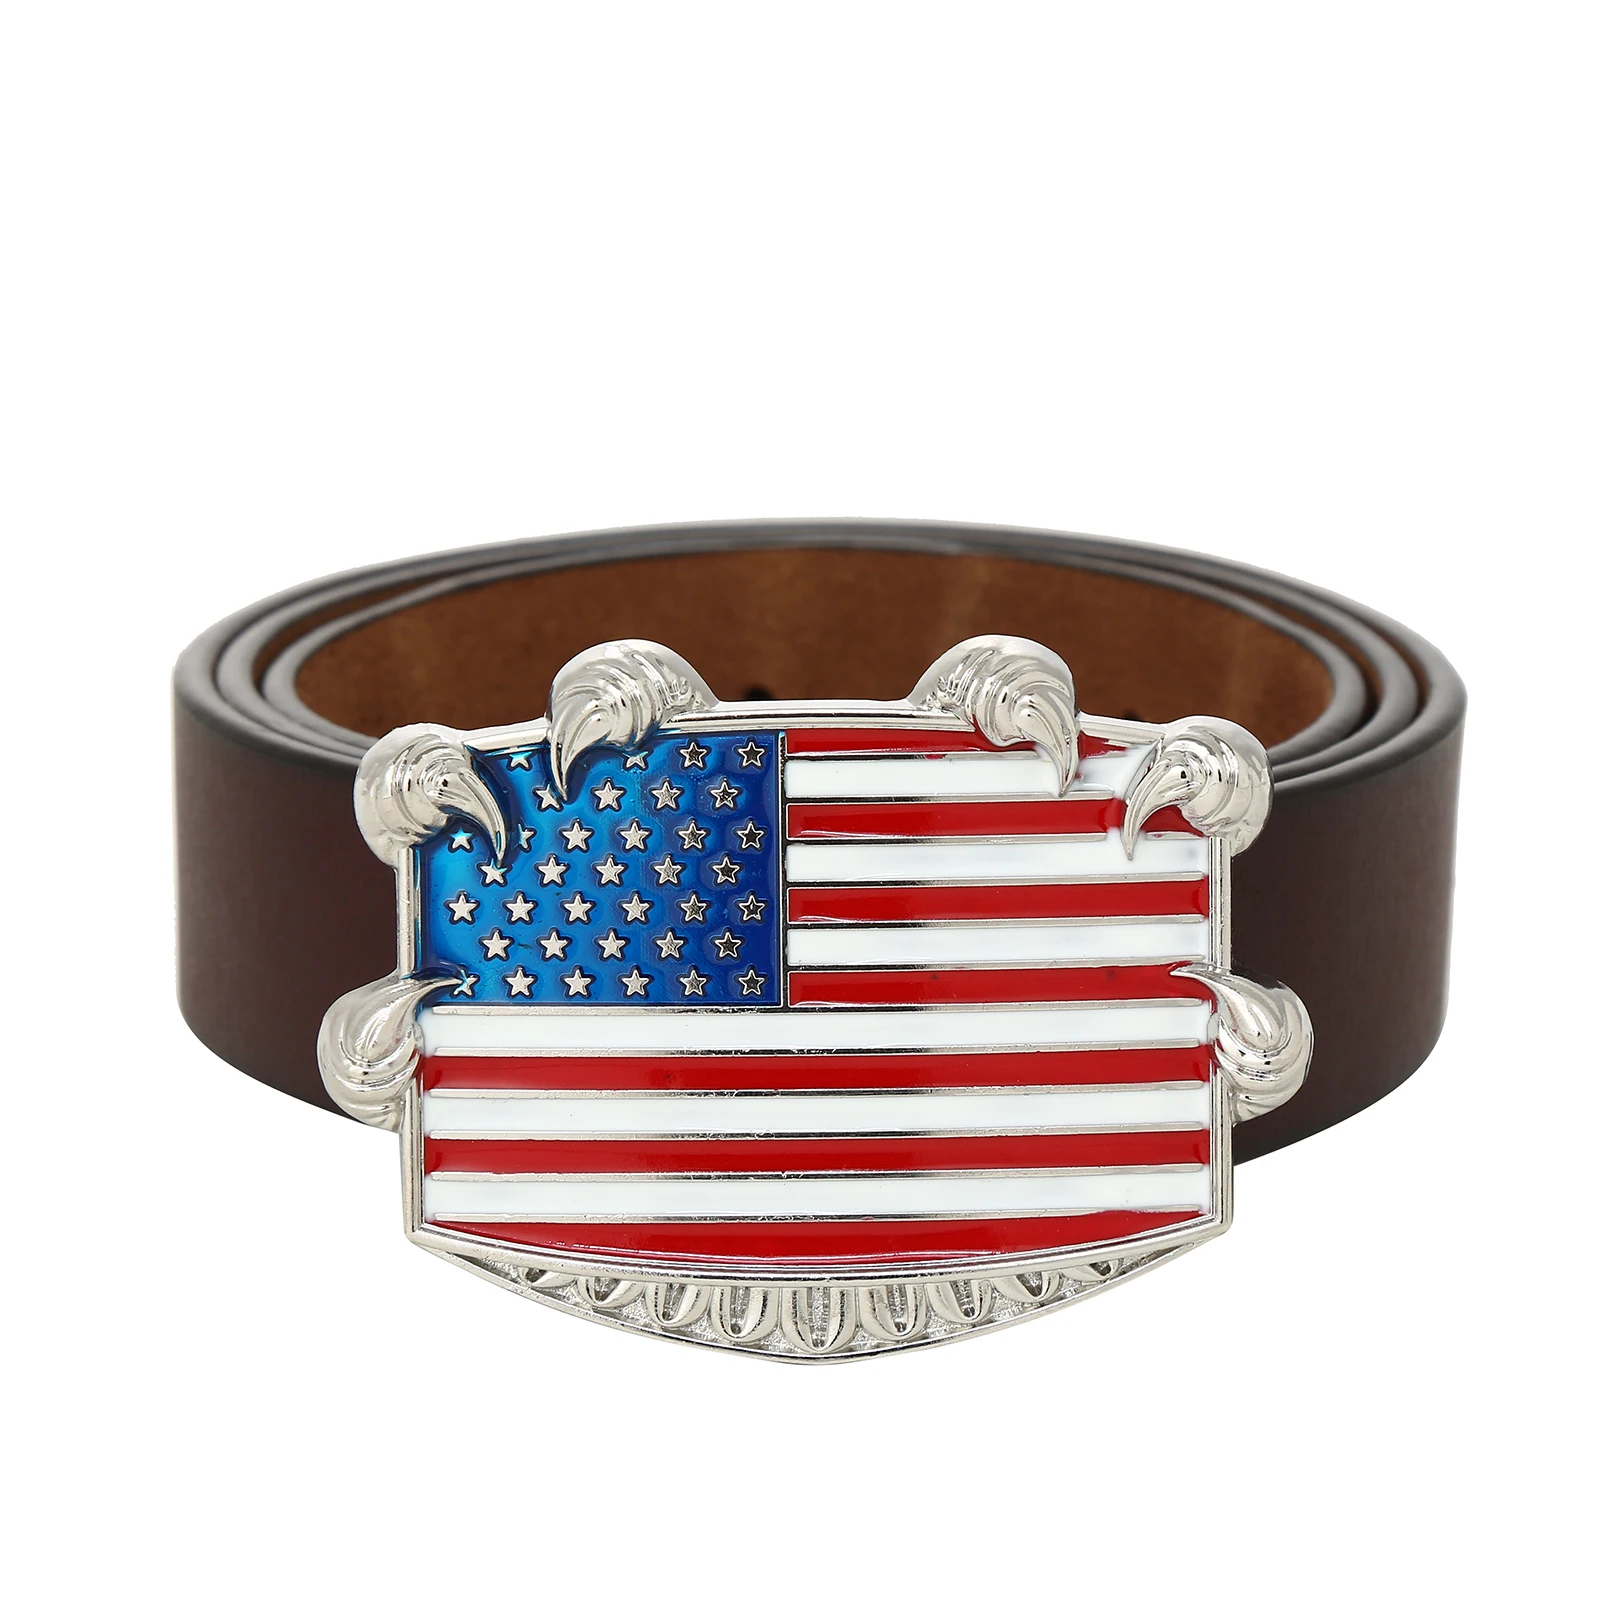 Western cowboy American flag and Eagle Hand oil craft metal belt buckle with leather belt denim belt decorative accessories